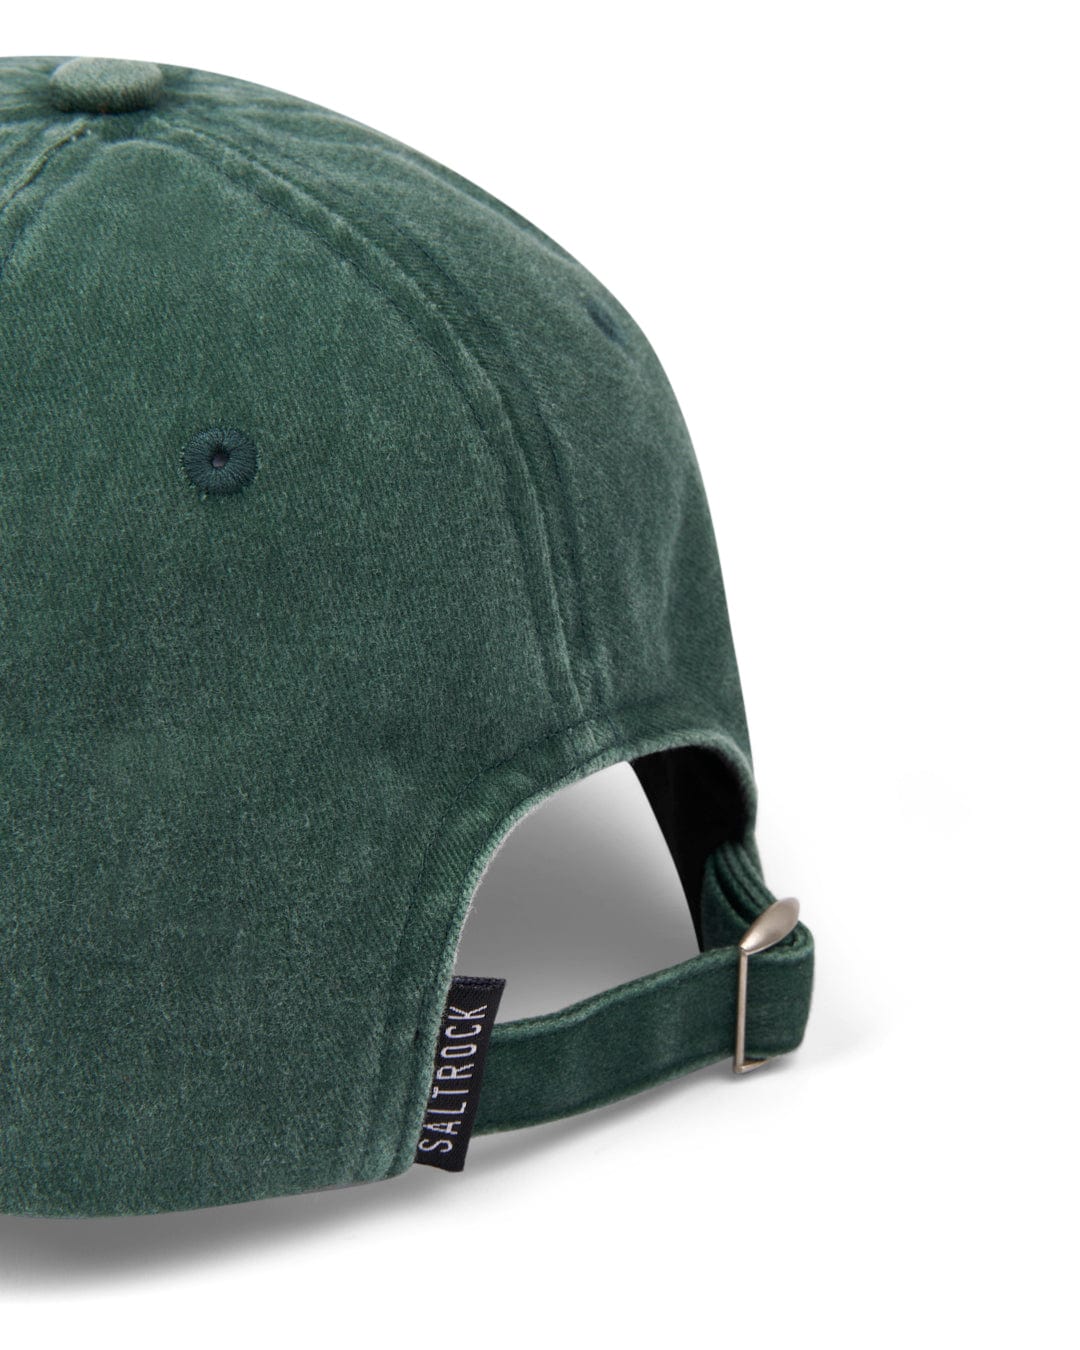 Adjustable SR Original Cap - Green with a metallic buckle and a Saltrock branded badge visible on the adjustable strap.